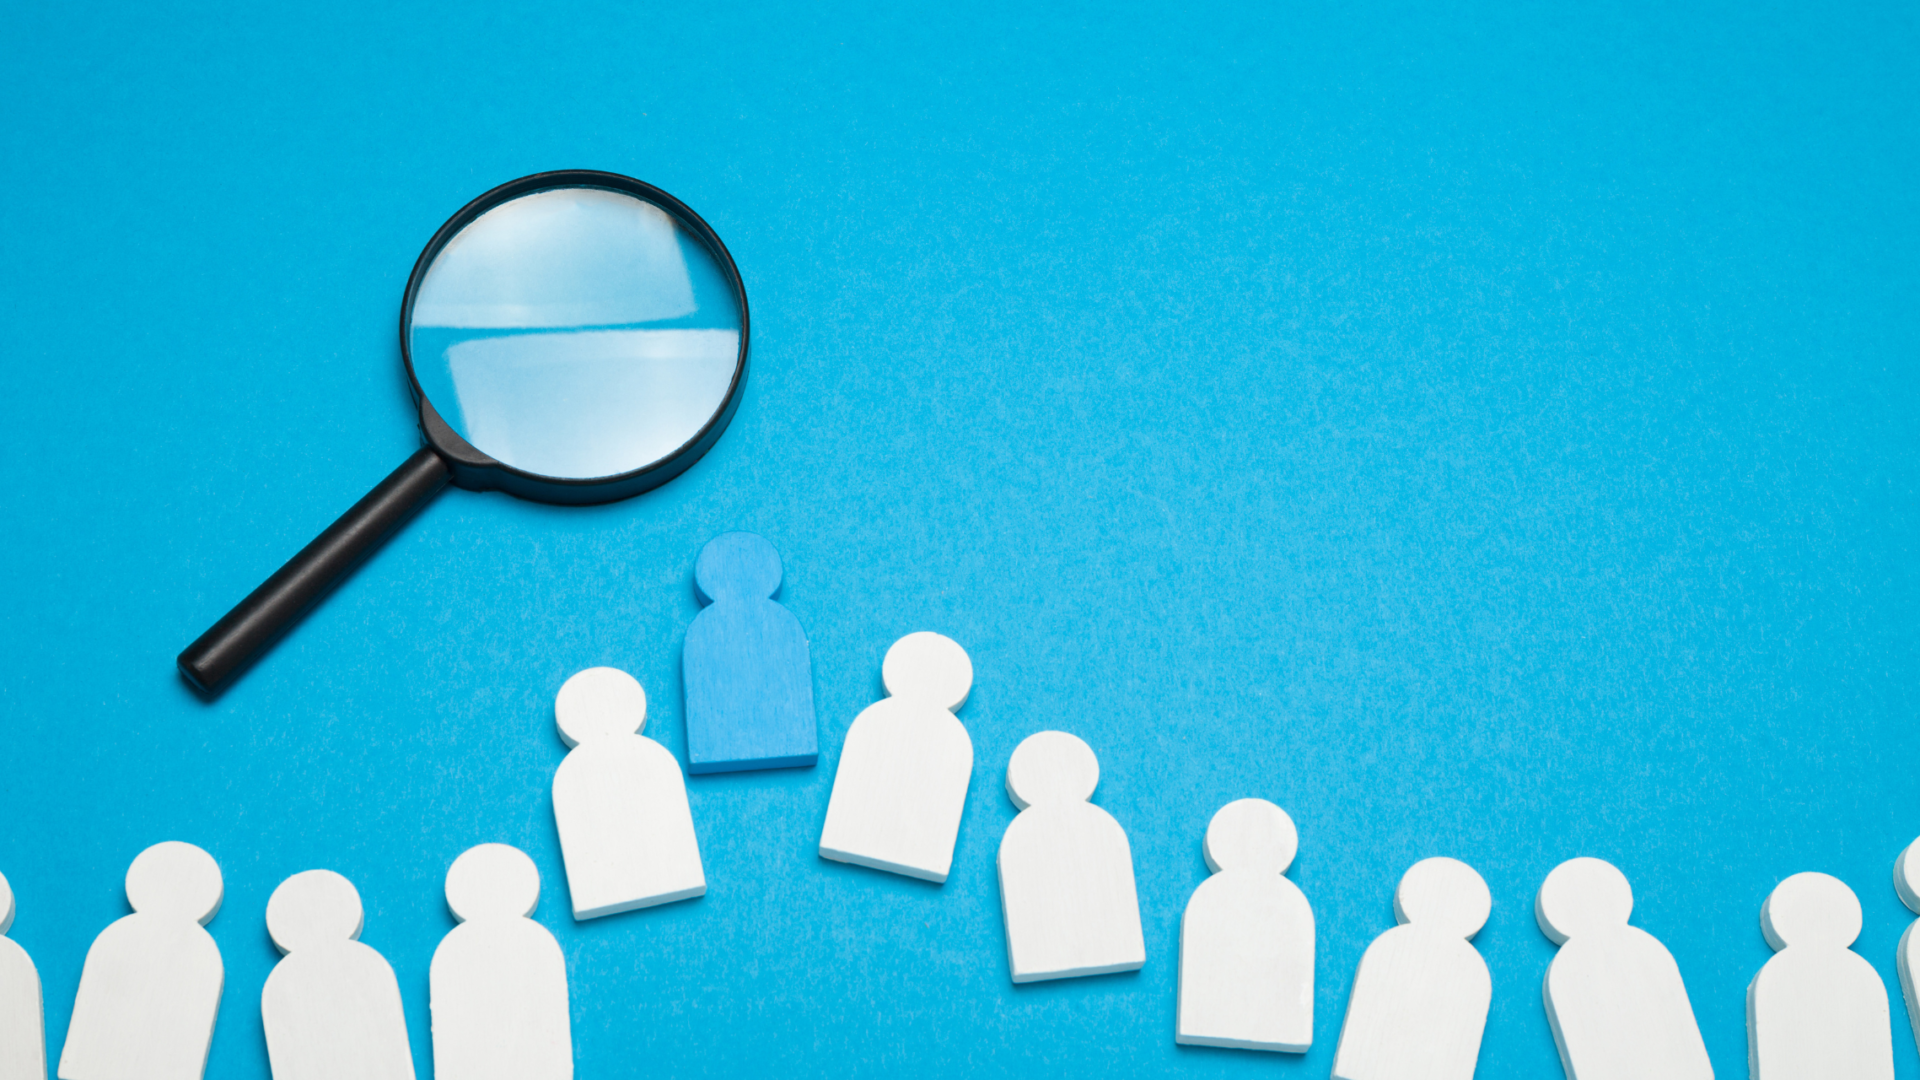 Recruiters, Time to Diversify Your Sourcing Strategy